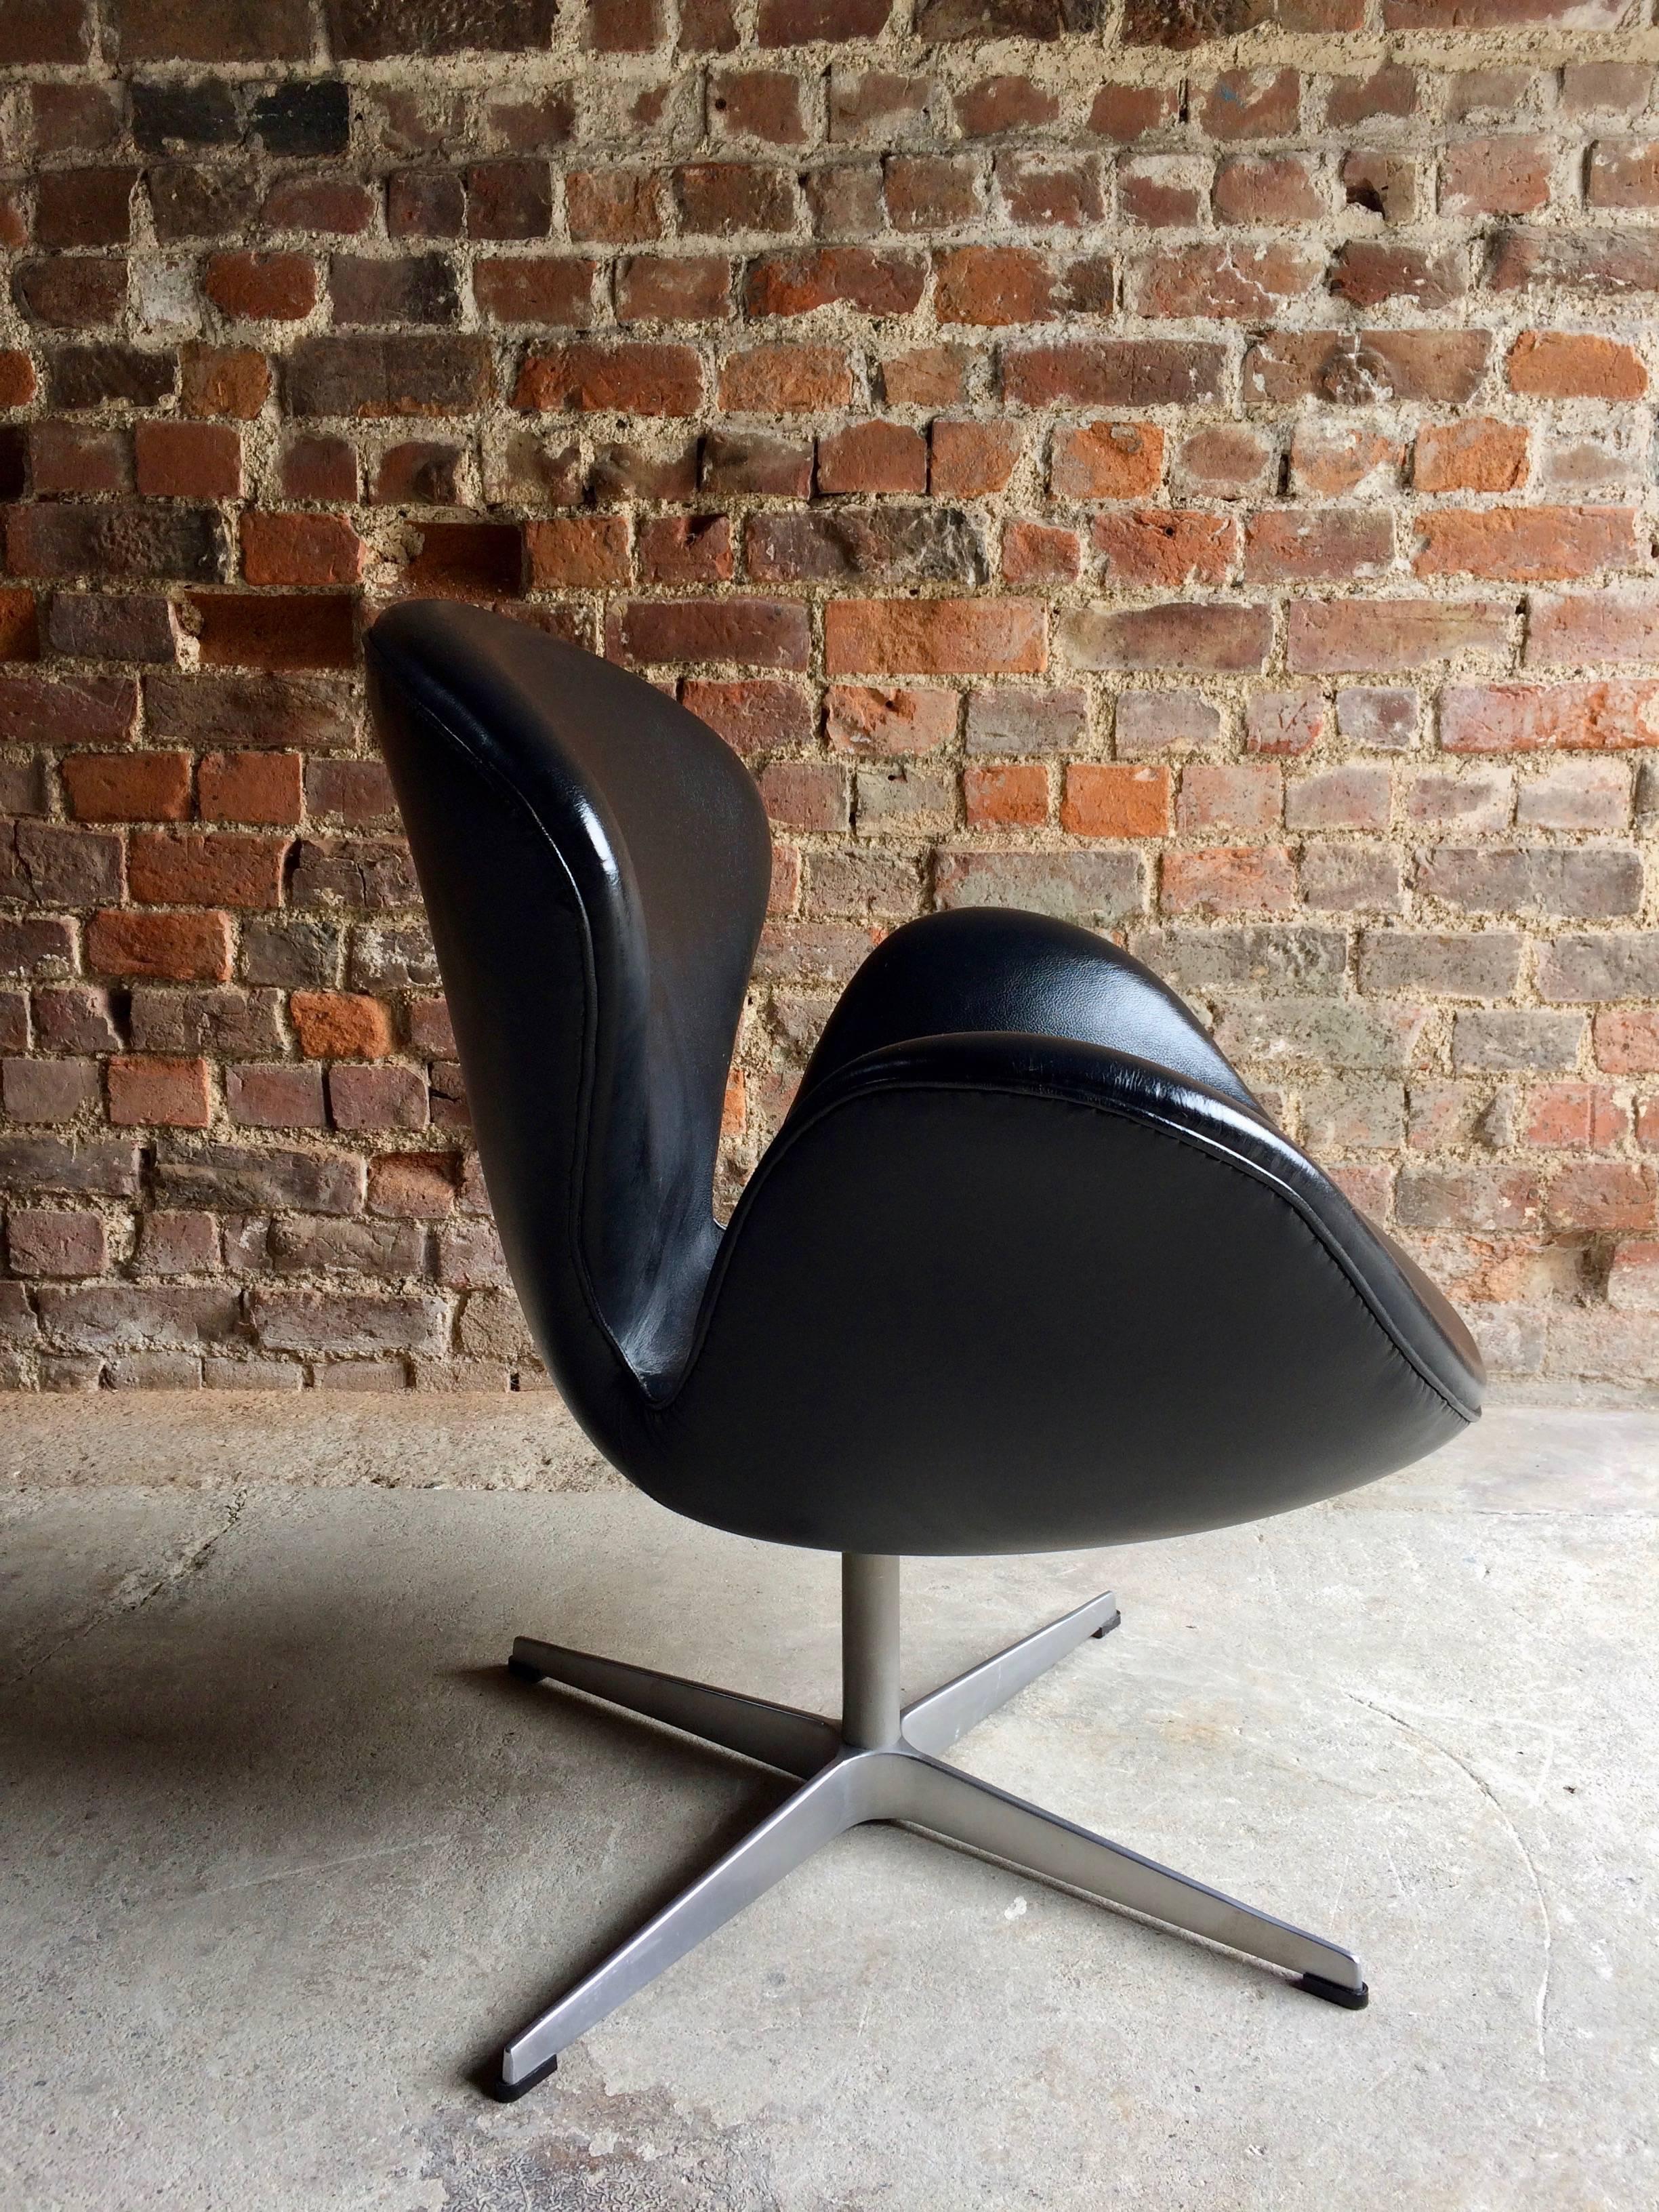 A Swan chair designed by Arne Jacobsen and manufactured by Fritz Hansen circa 2002, soft black leather hide with steel swivel base, makers label under seat, stamped under base.

Arne Jacobsen designed the Swan™ as well as the Egg™ for the lobby